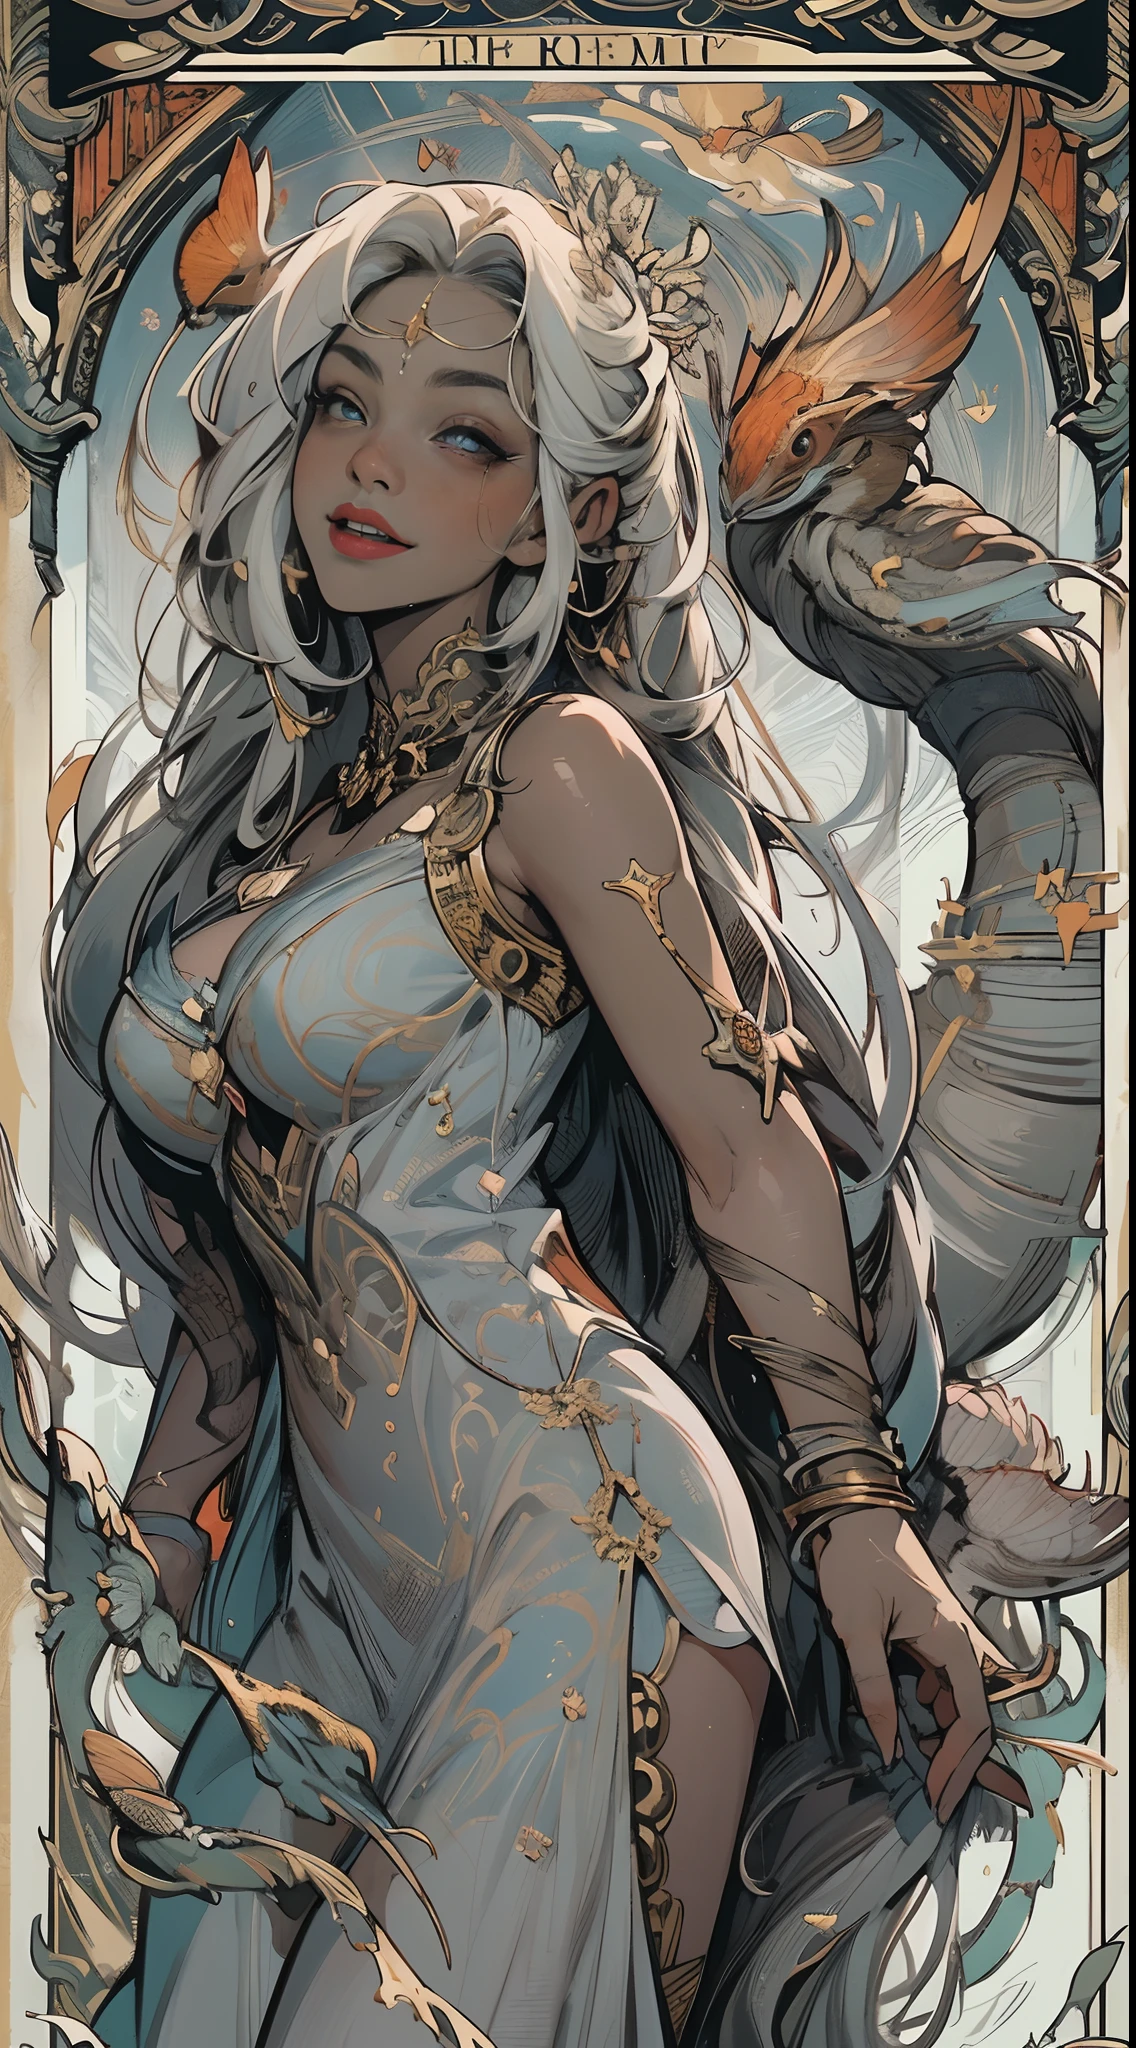 tarot cards，Full tarot border，(The image is surrounded by a tarot card-style border:1.8), Black Woman Ahegao，Silver hair，A heartwarming smile，Thick lips，Elongated eyes，Charming eyes，（Beautiful and detailed eye description），Snow-whiteskin，mature，Redlip（Very fine and beautiful），ultra - detailed，tmasterpiece，））happy laughing，Open-mouthed，Barefoot，without wearing shoes，In the depths of the ocean，（（（tmasterpiece），（Very detailed CG unity 8K wallpaper）），best qualtiy，cinmatic lighting，detailed back ground，Sexy gesture，（Correct face 1.6）（Wearing：Red slip dress，soaked pubic hair，Metal trims，Skirt，），Flowing skirt，expose arms，（Background with：Ruins of Atlantis，），（Beneath your feet：Destroyed buildings，）Deep background，Fantastic and incredible，Epic composition，(Complicated details，Hyper-detailing:1.2)，art  stations，（tmasterpiece，best qualtiy）surrealism, shadowing, anaglyph, stereograms, angle of view,  Cinematic lighting, 8K, Super detail, ccurate, Best quality, A high resolution, Award-Awarded, Anatomically correct，Seafoam, Buble, shells, Fish, pearls，nautilus，Plants，jelly fish，The corals，Vintage style，（zentangle，datura，Tangles，entangled）， (s fractal art: 1.3)，holy rays，gold foil，Gold leaf art，glitter drawing，Full tarot border，（Full border 1.5），Fang Yi，